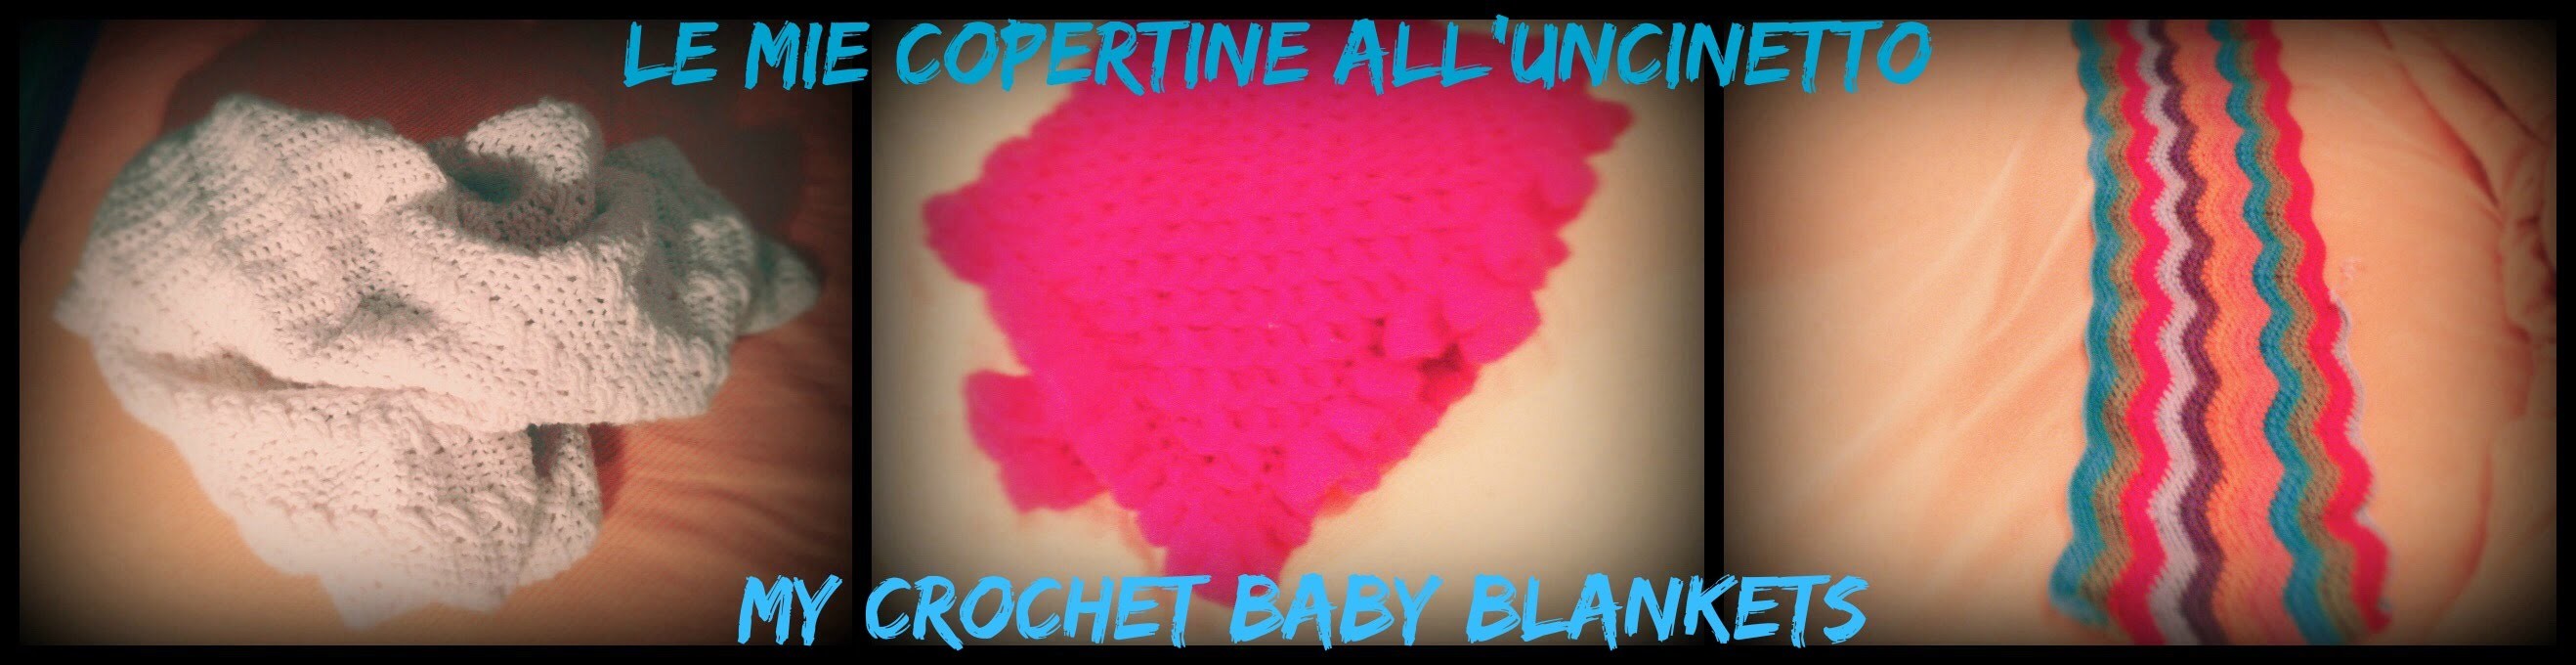 LE MIE COPERTINE ALL'UNCINETTO|MY CROCHET BABY BLANKETS